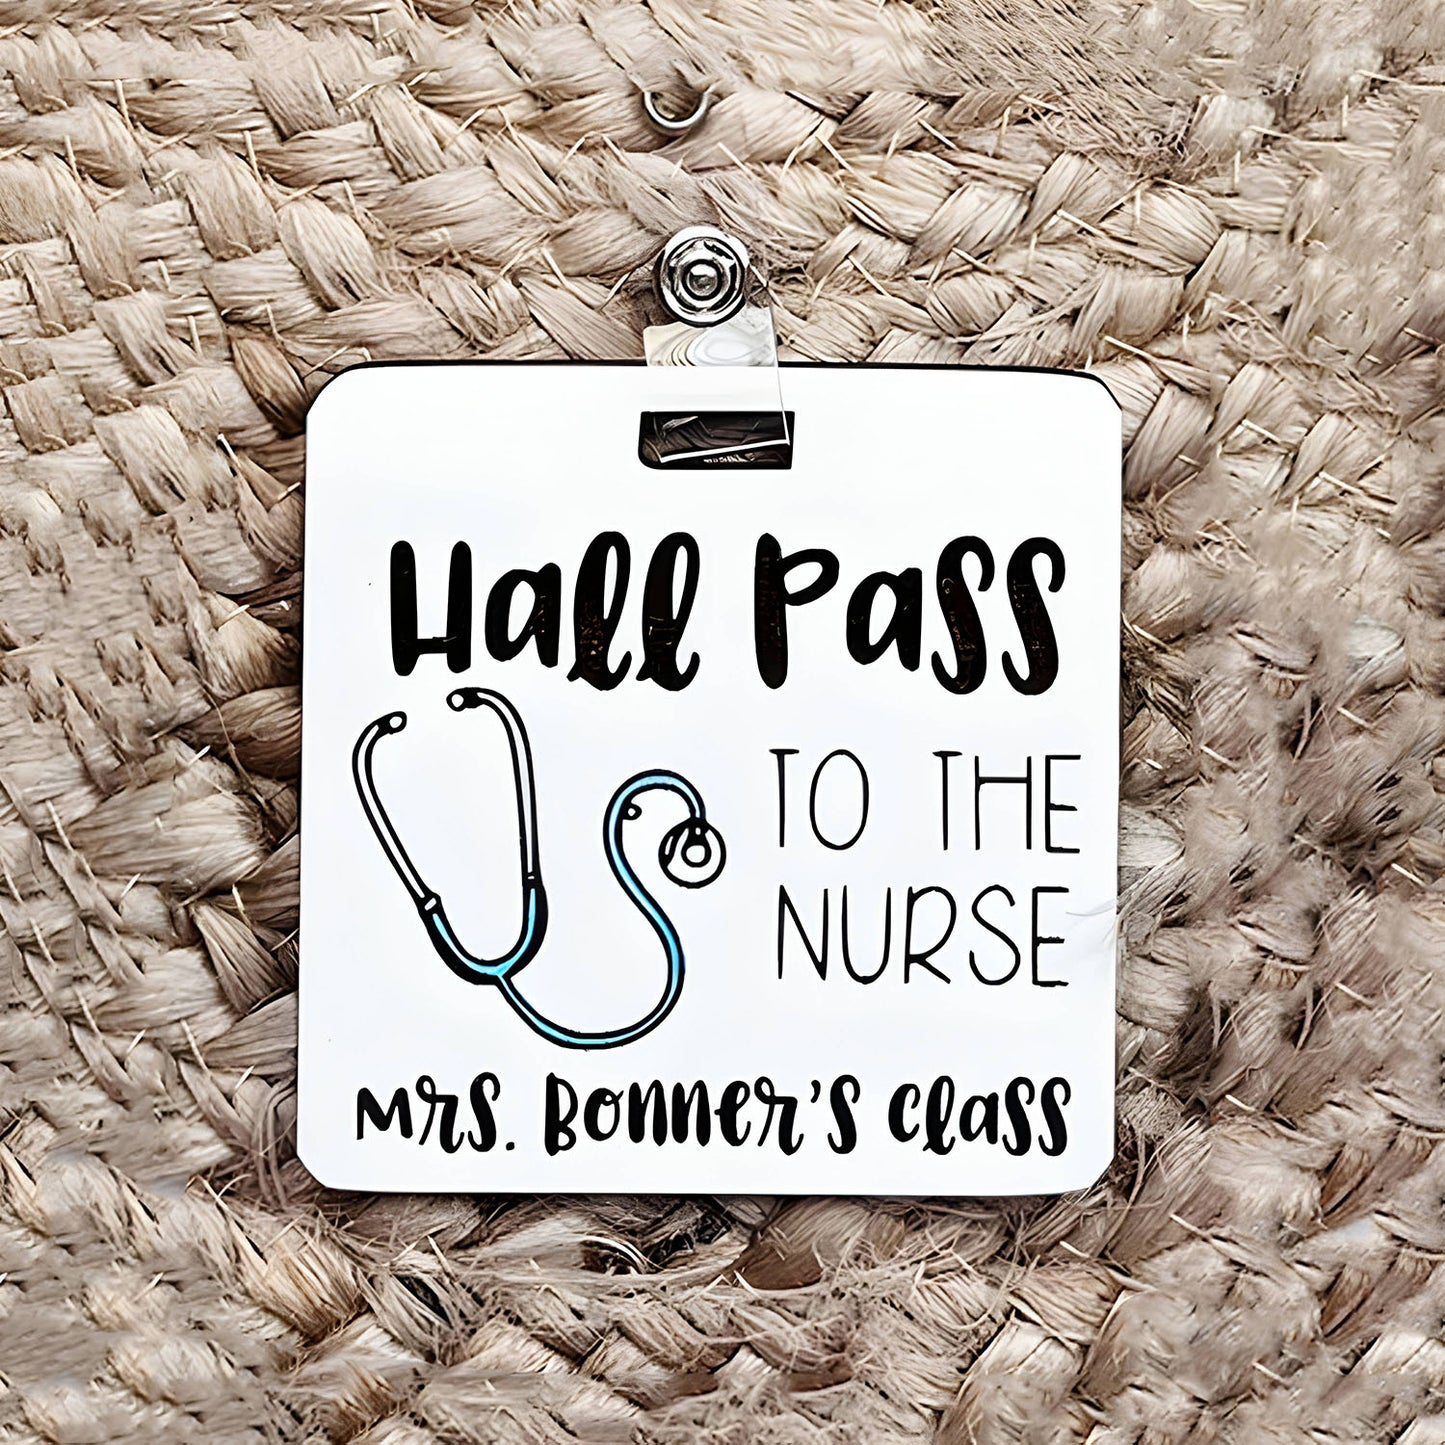 Personalized School Hall Pass - "Hall Pass to the Nurse"